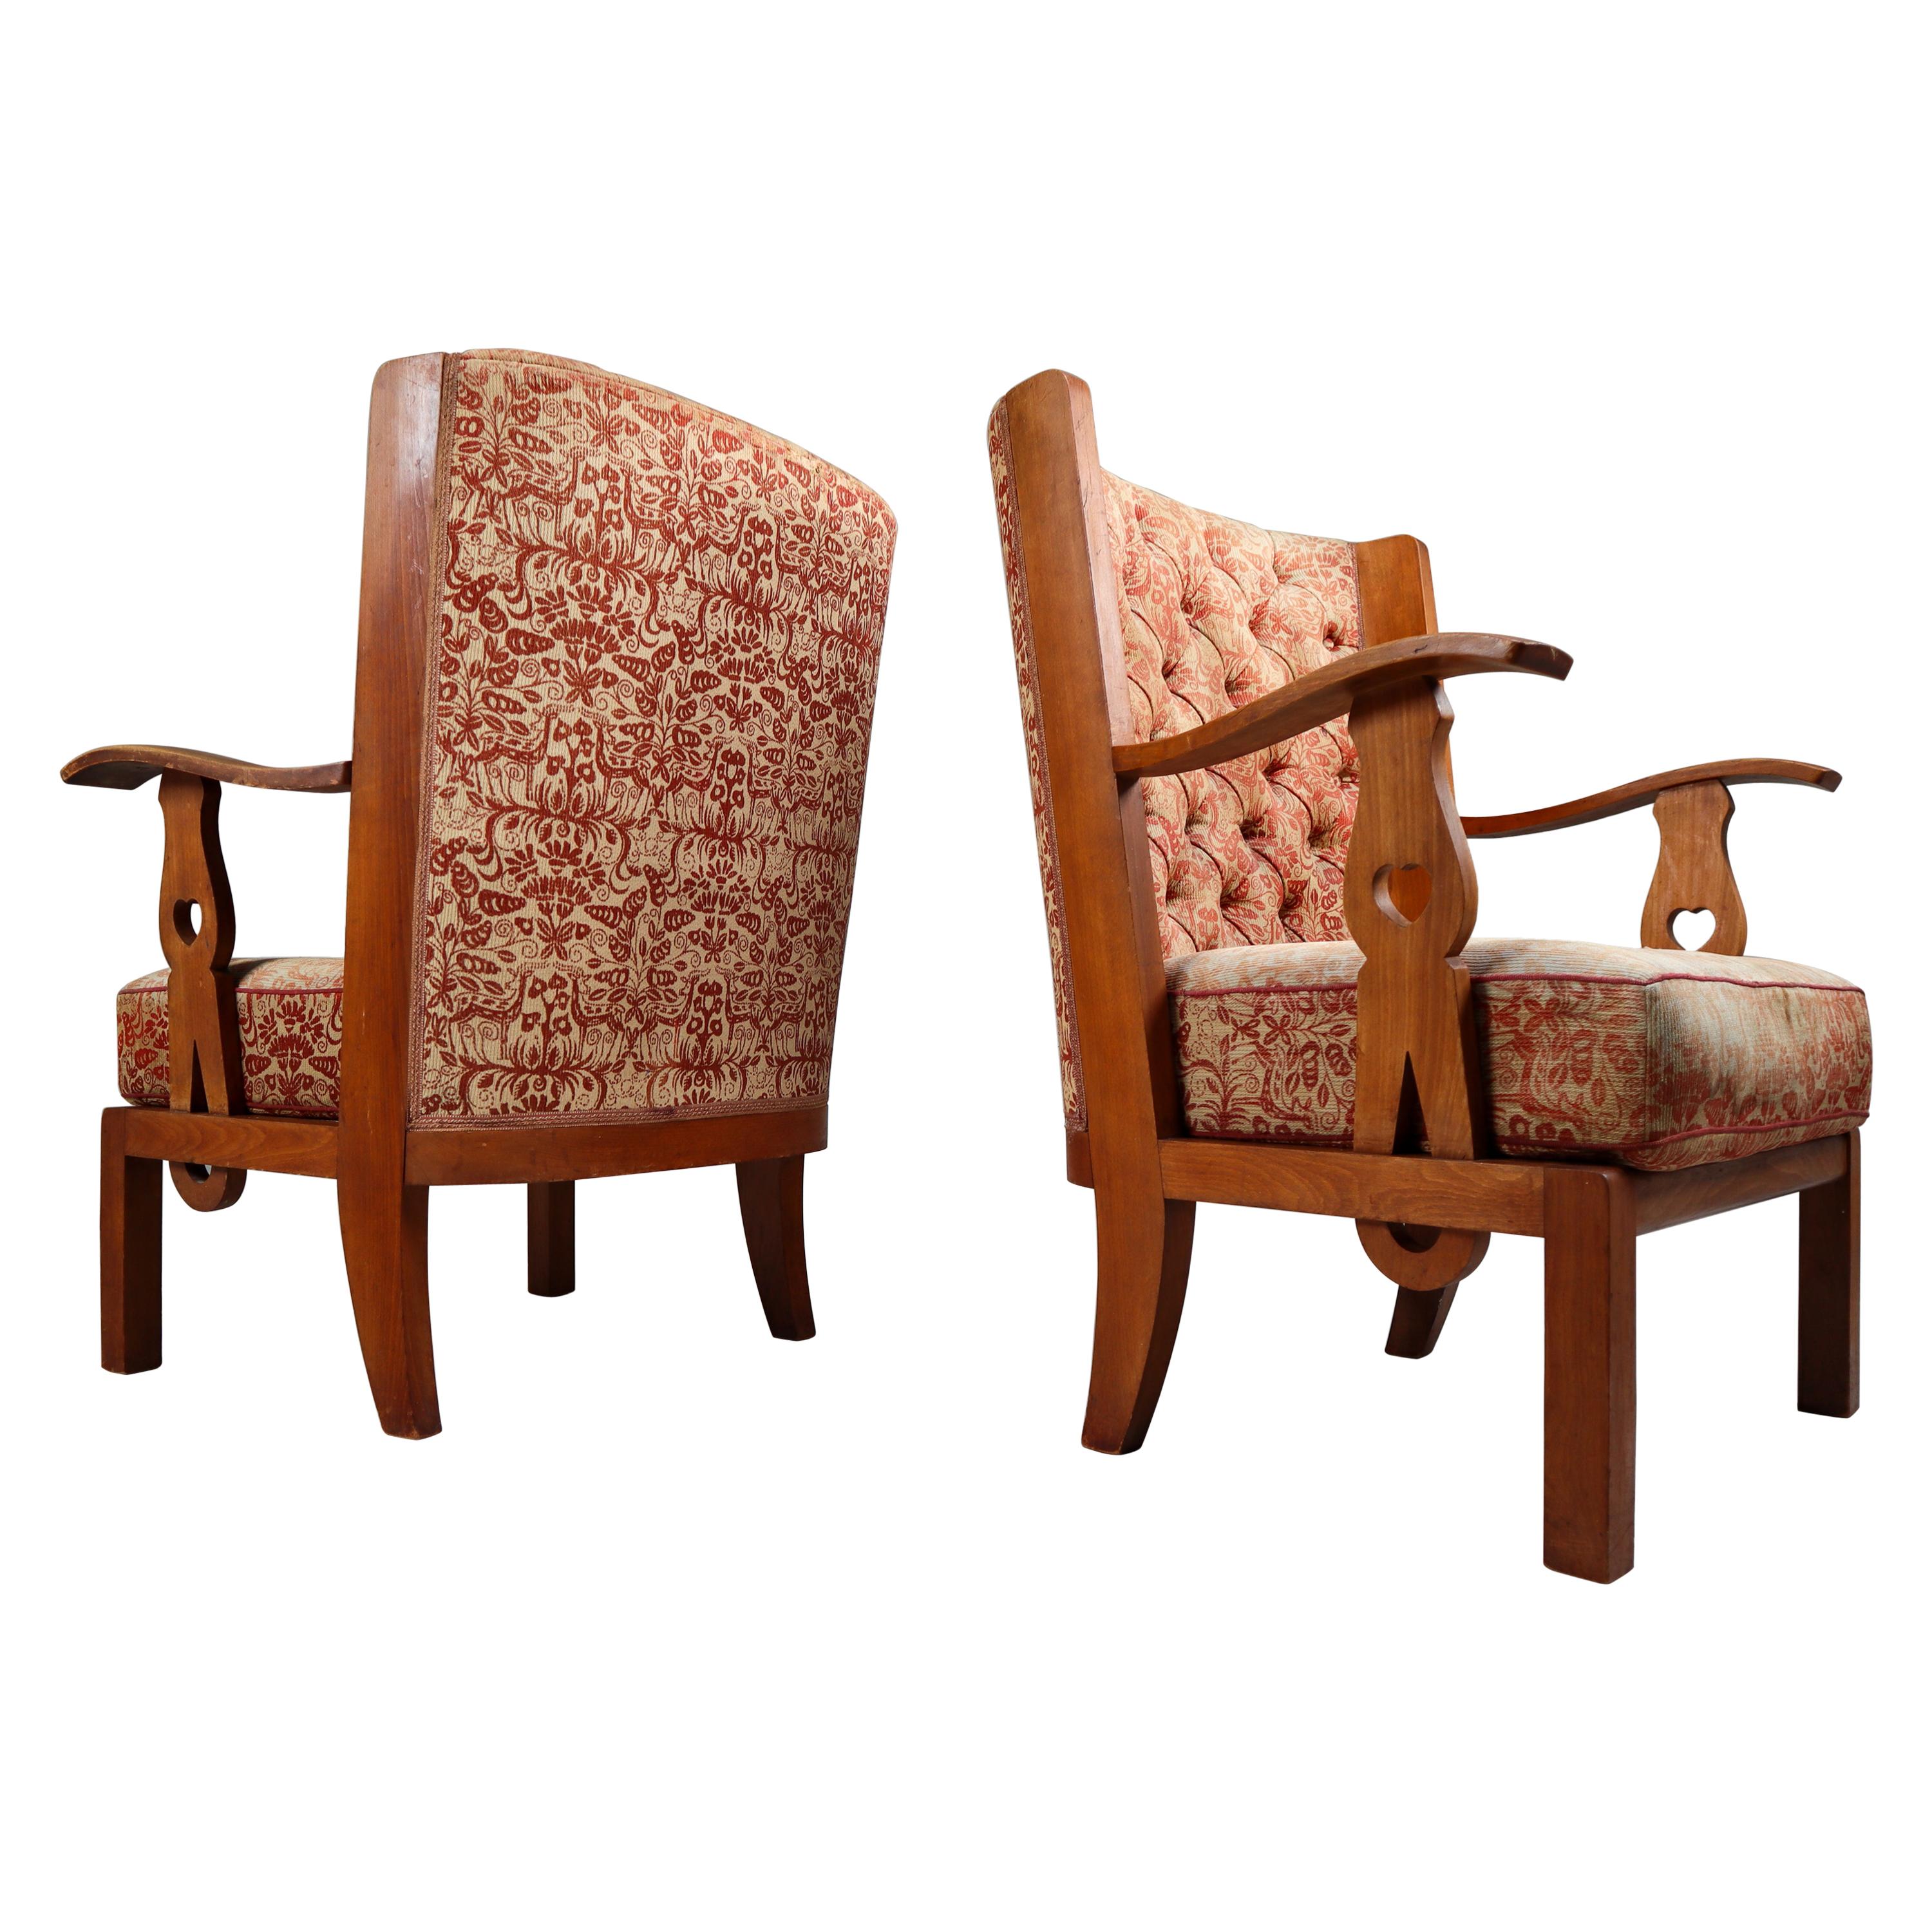 Two Sculptural "Orkney" Style Armchairs, France, 1940s